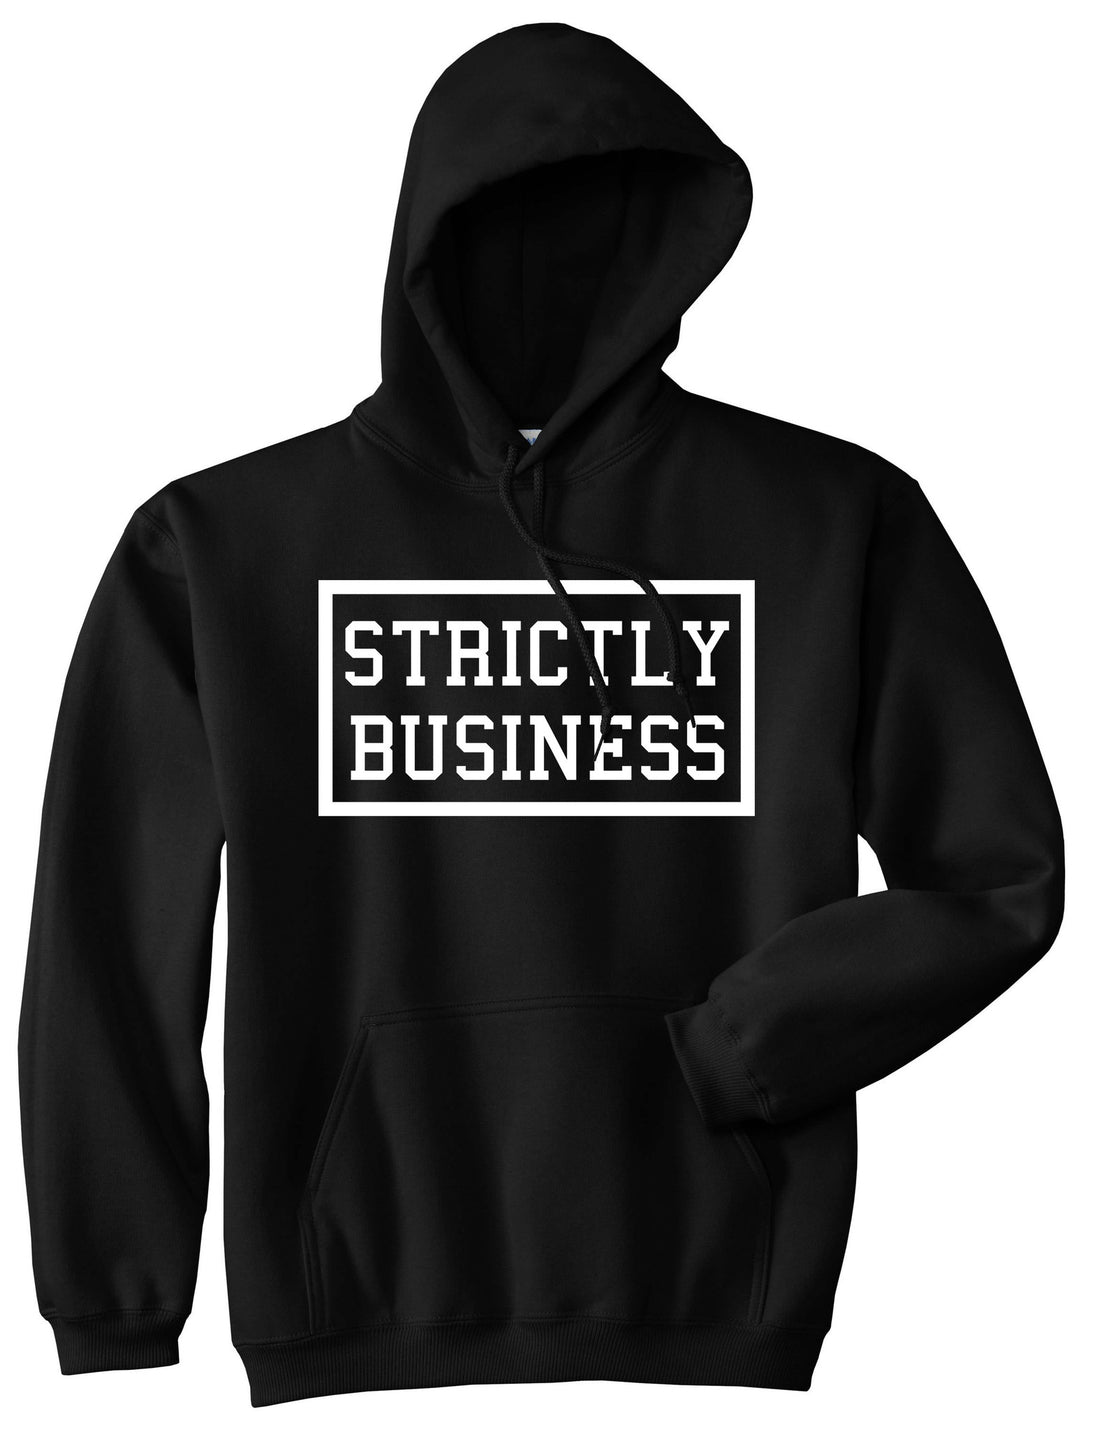 Strictly Business Pullover Hoodie Hoody in Black by Kings Of NY